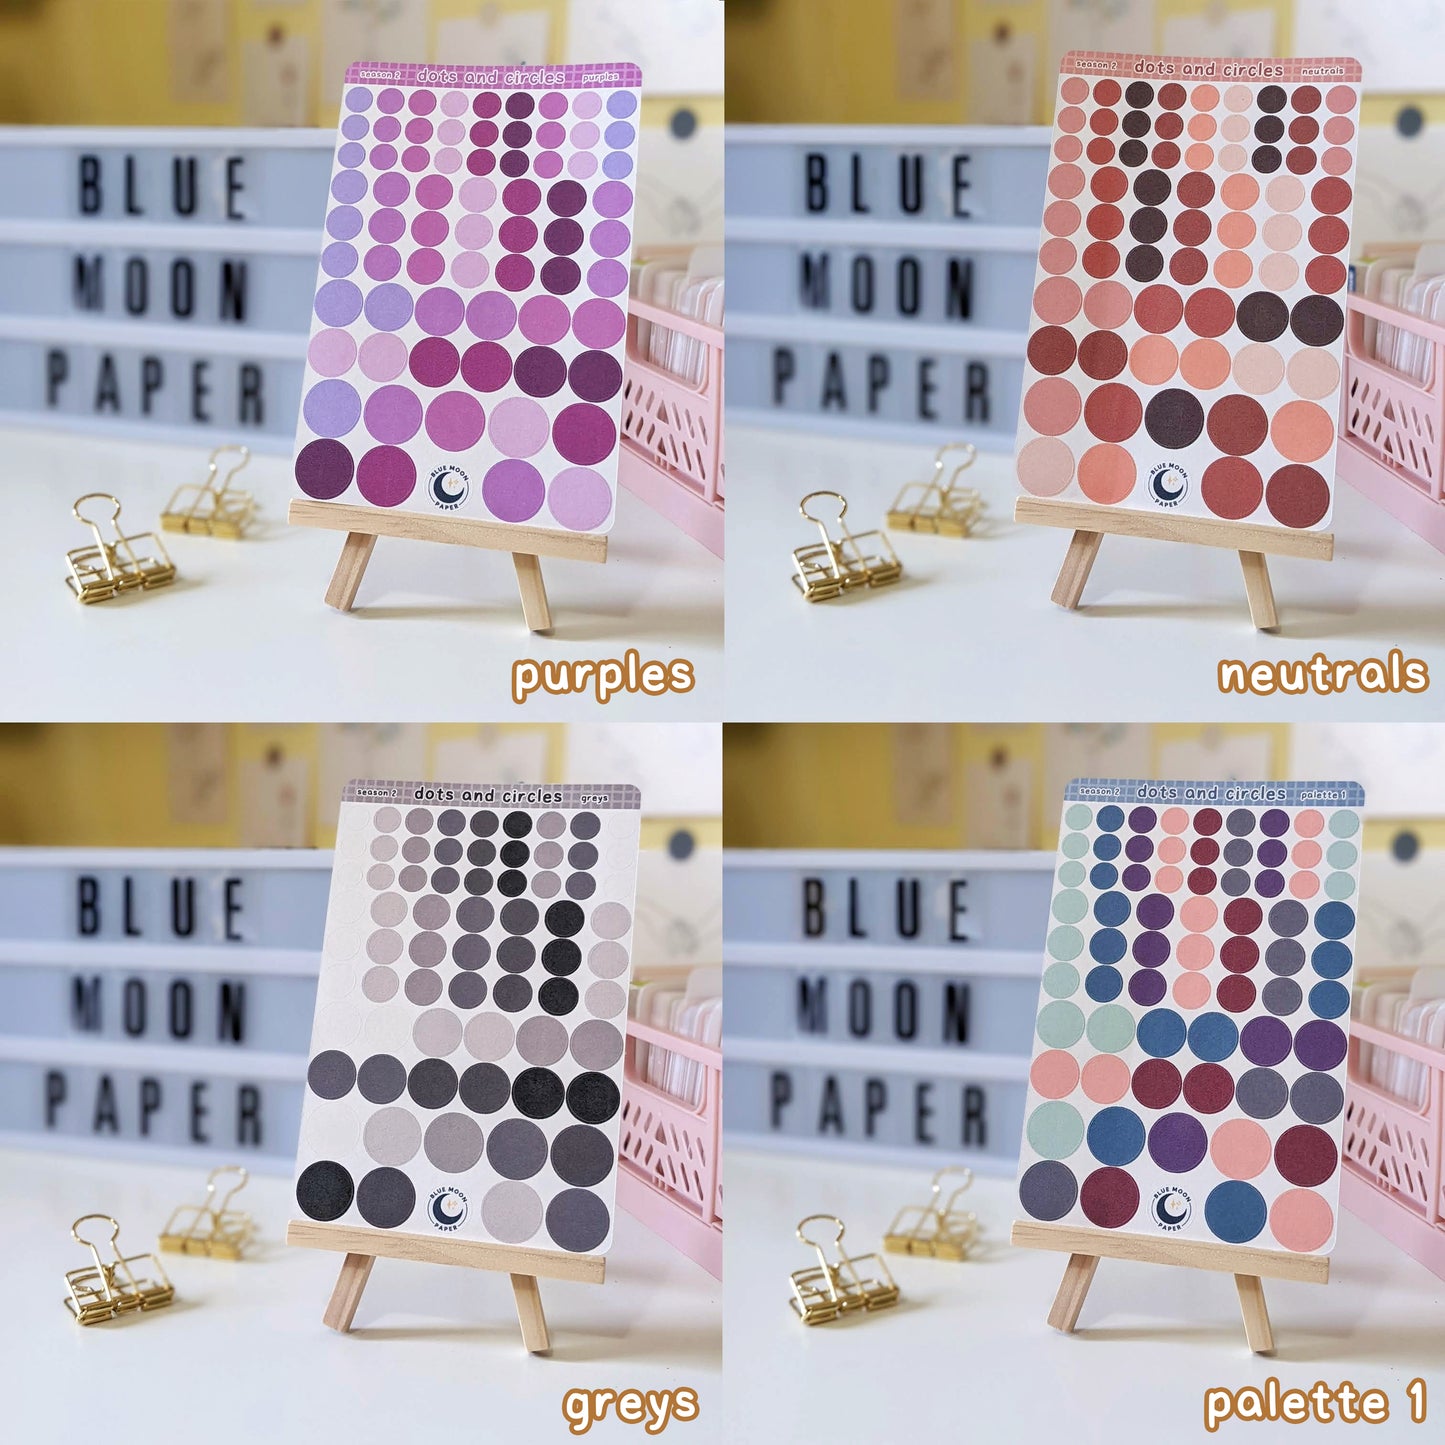 A grid of 4 sticker sheets featuring dots of 4 different sizes, in a variety of colours. These are the purple, neutral, grey, and palette 1 variants.